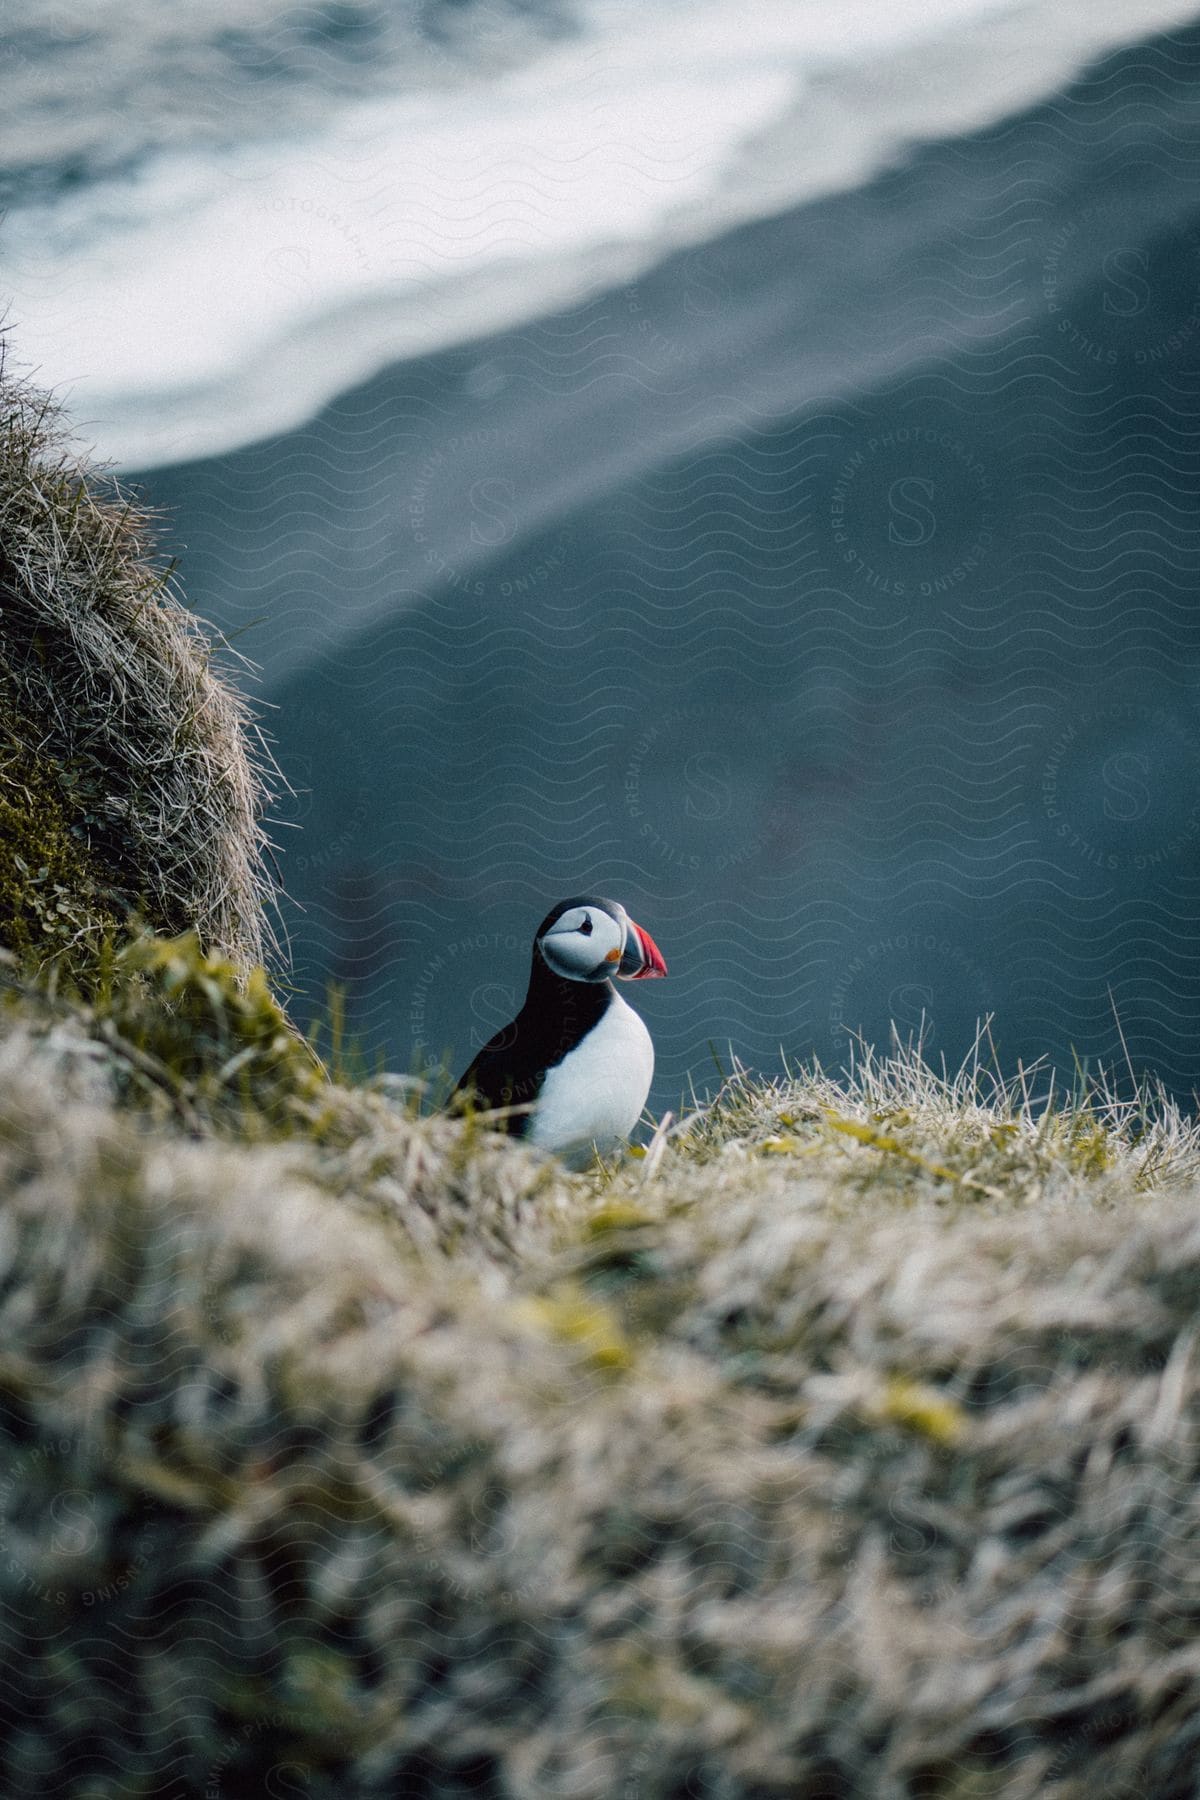 A puffin sitting in a natural landscape with water and grass